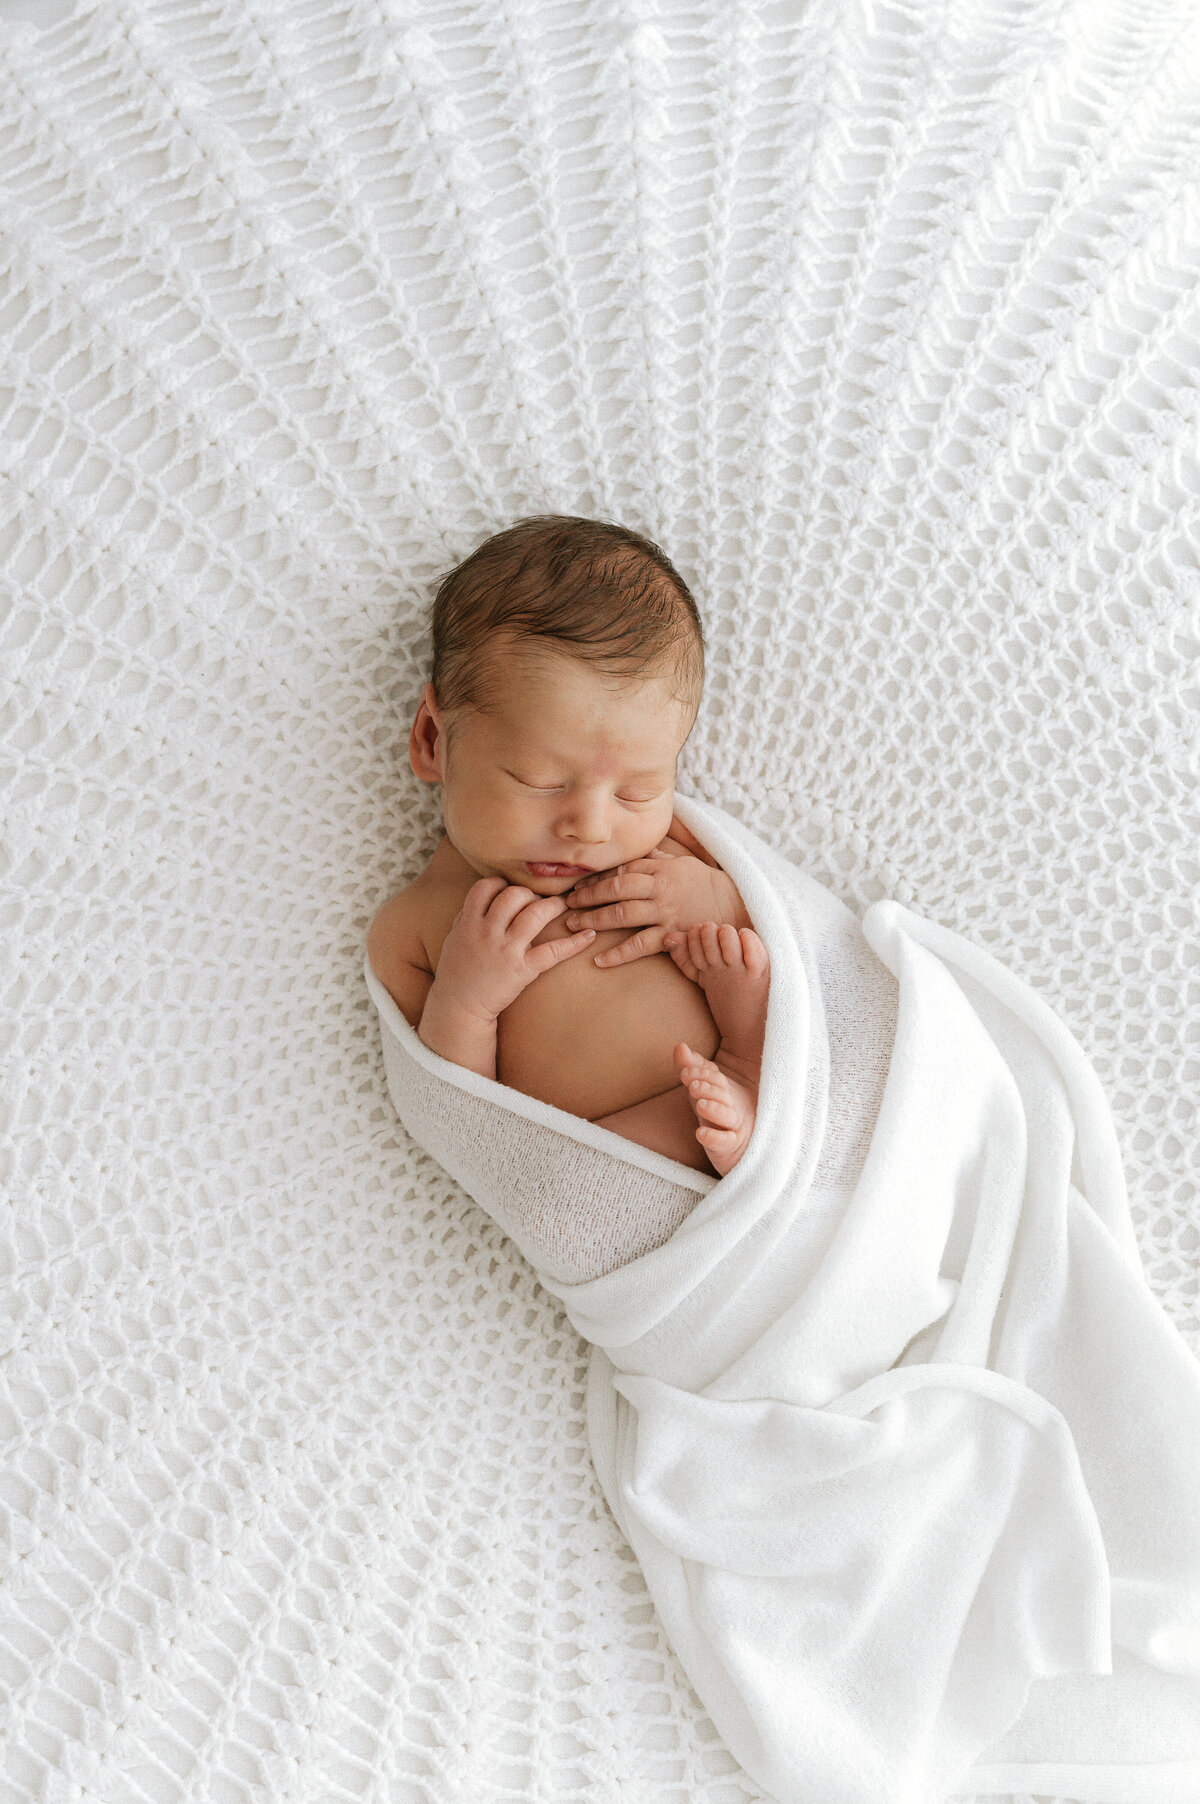 Baby lying on white blanket knitted by Grandma